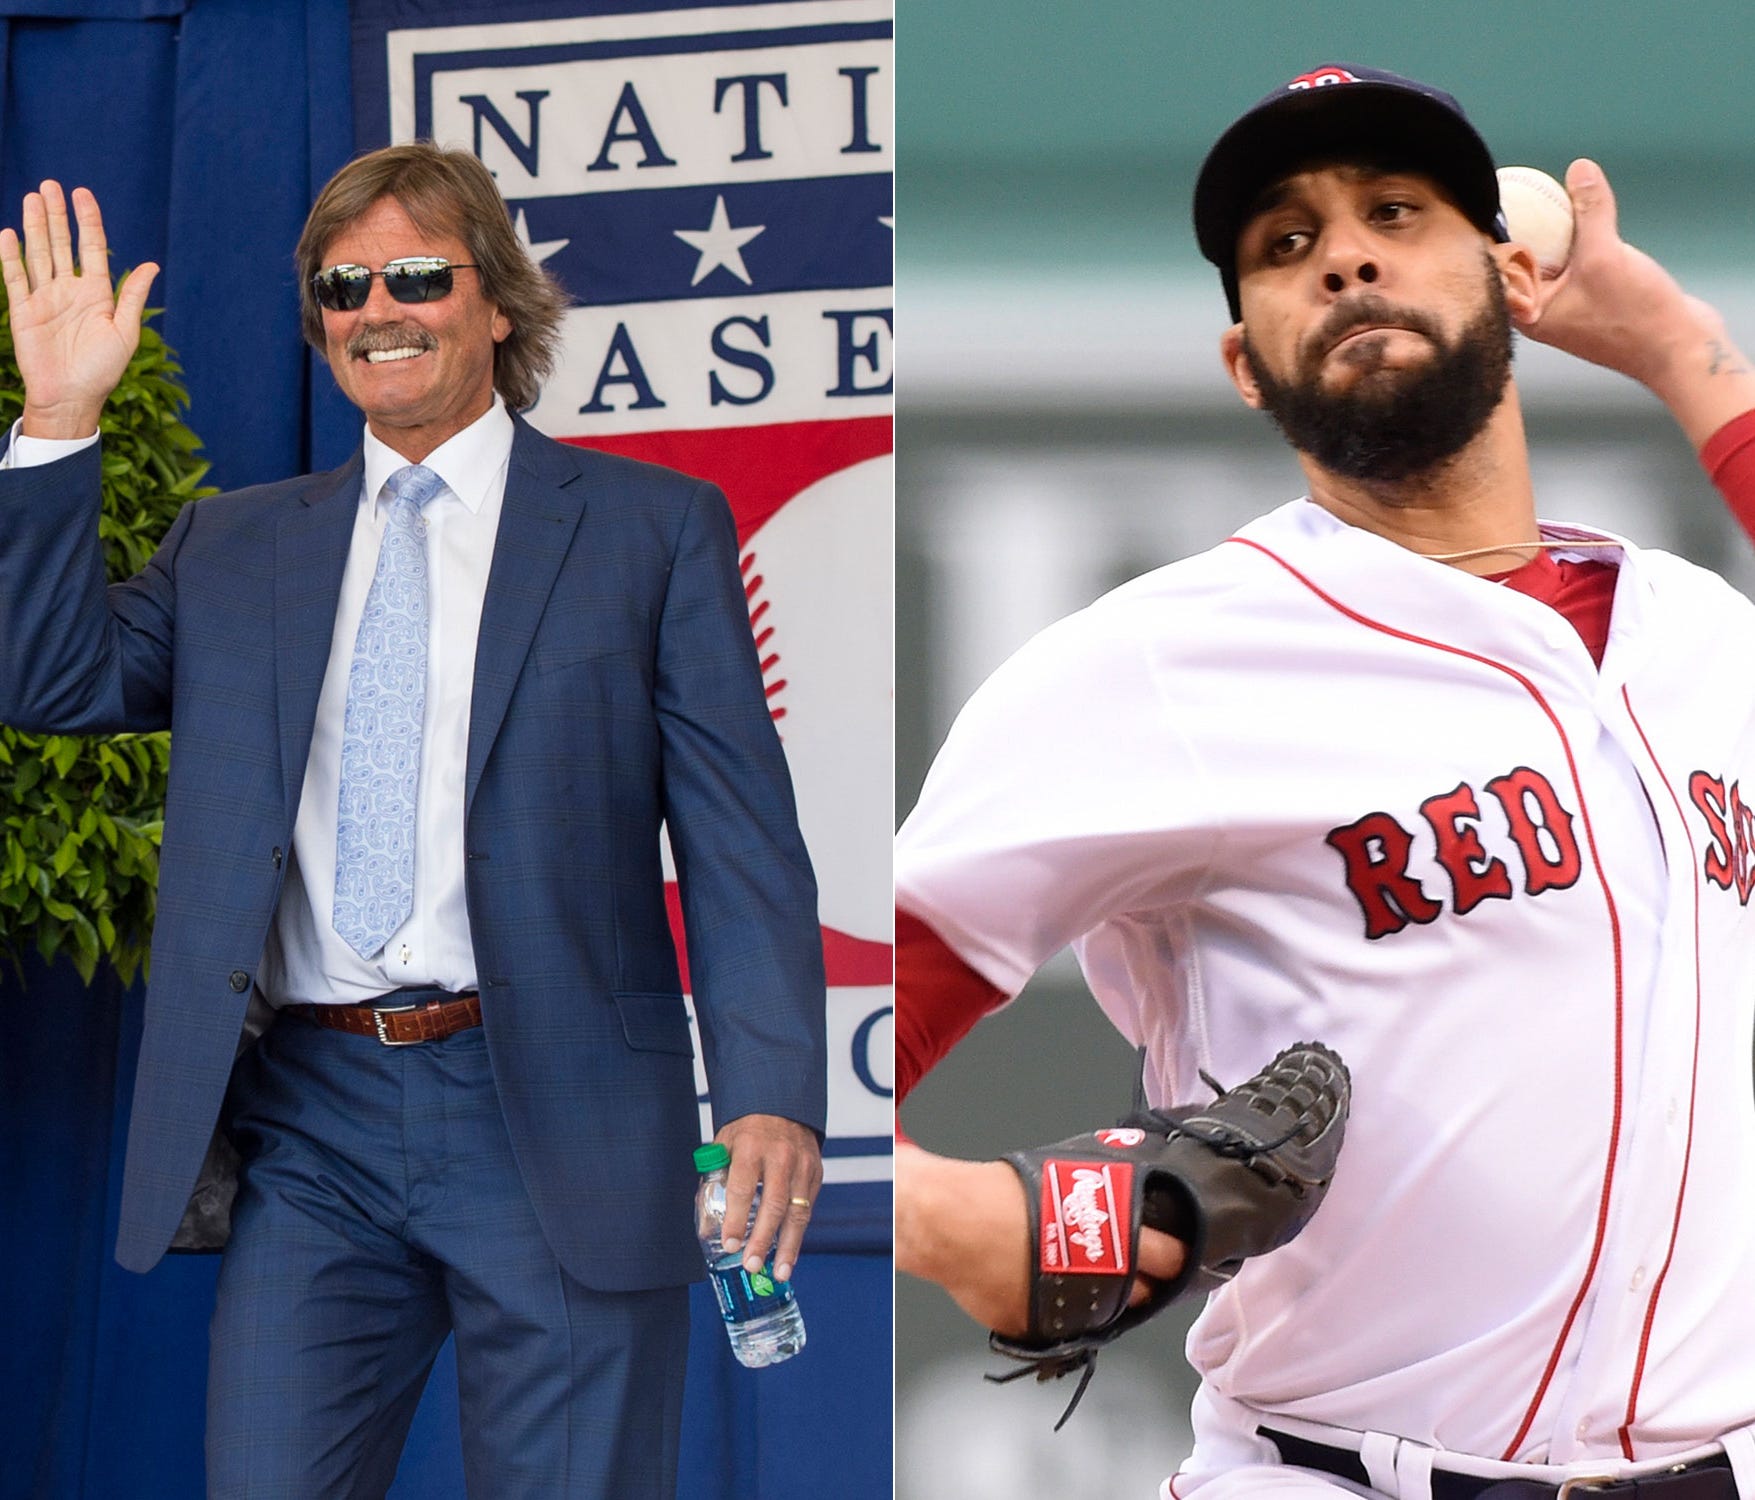 Hall of Famer Dennis Eckersley (left) and starter David Price had a confrontation in June.